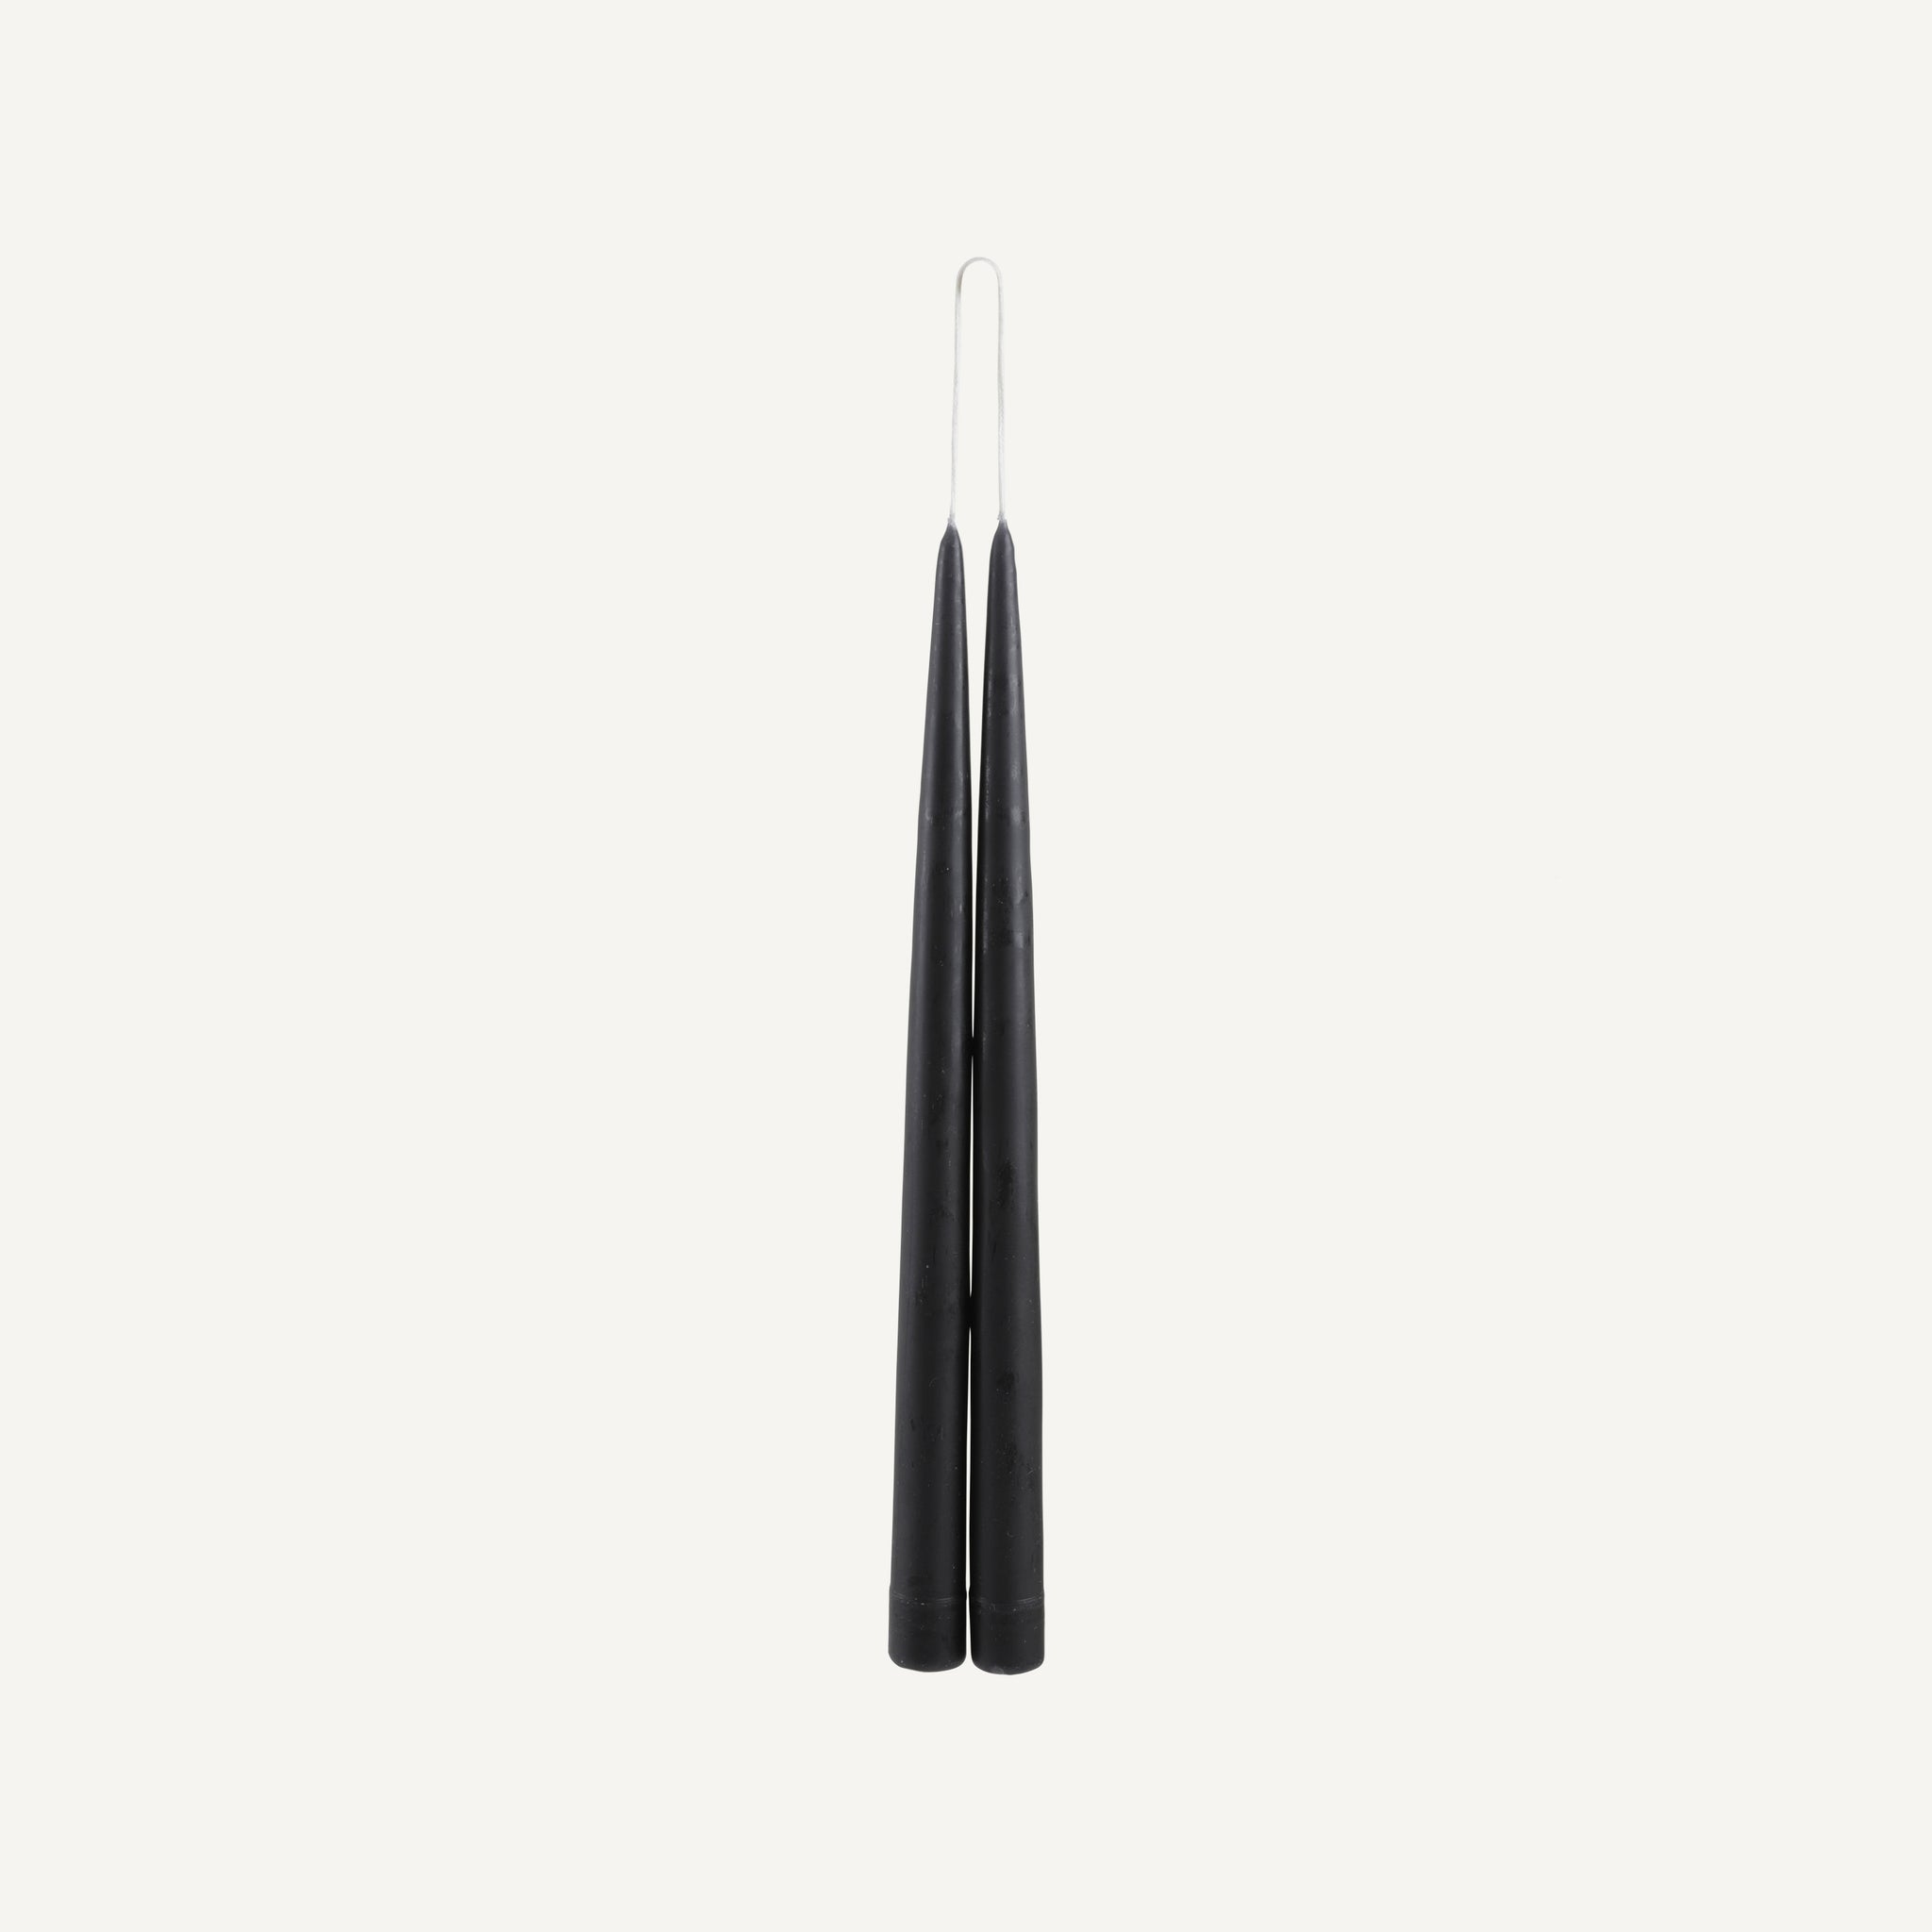 HAND-DIPPED TAPER CANDLES